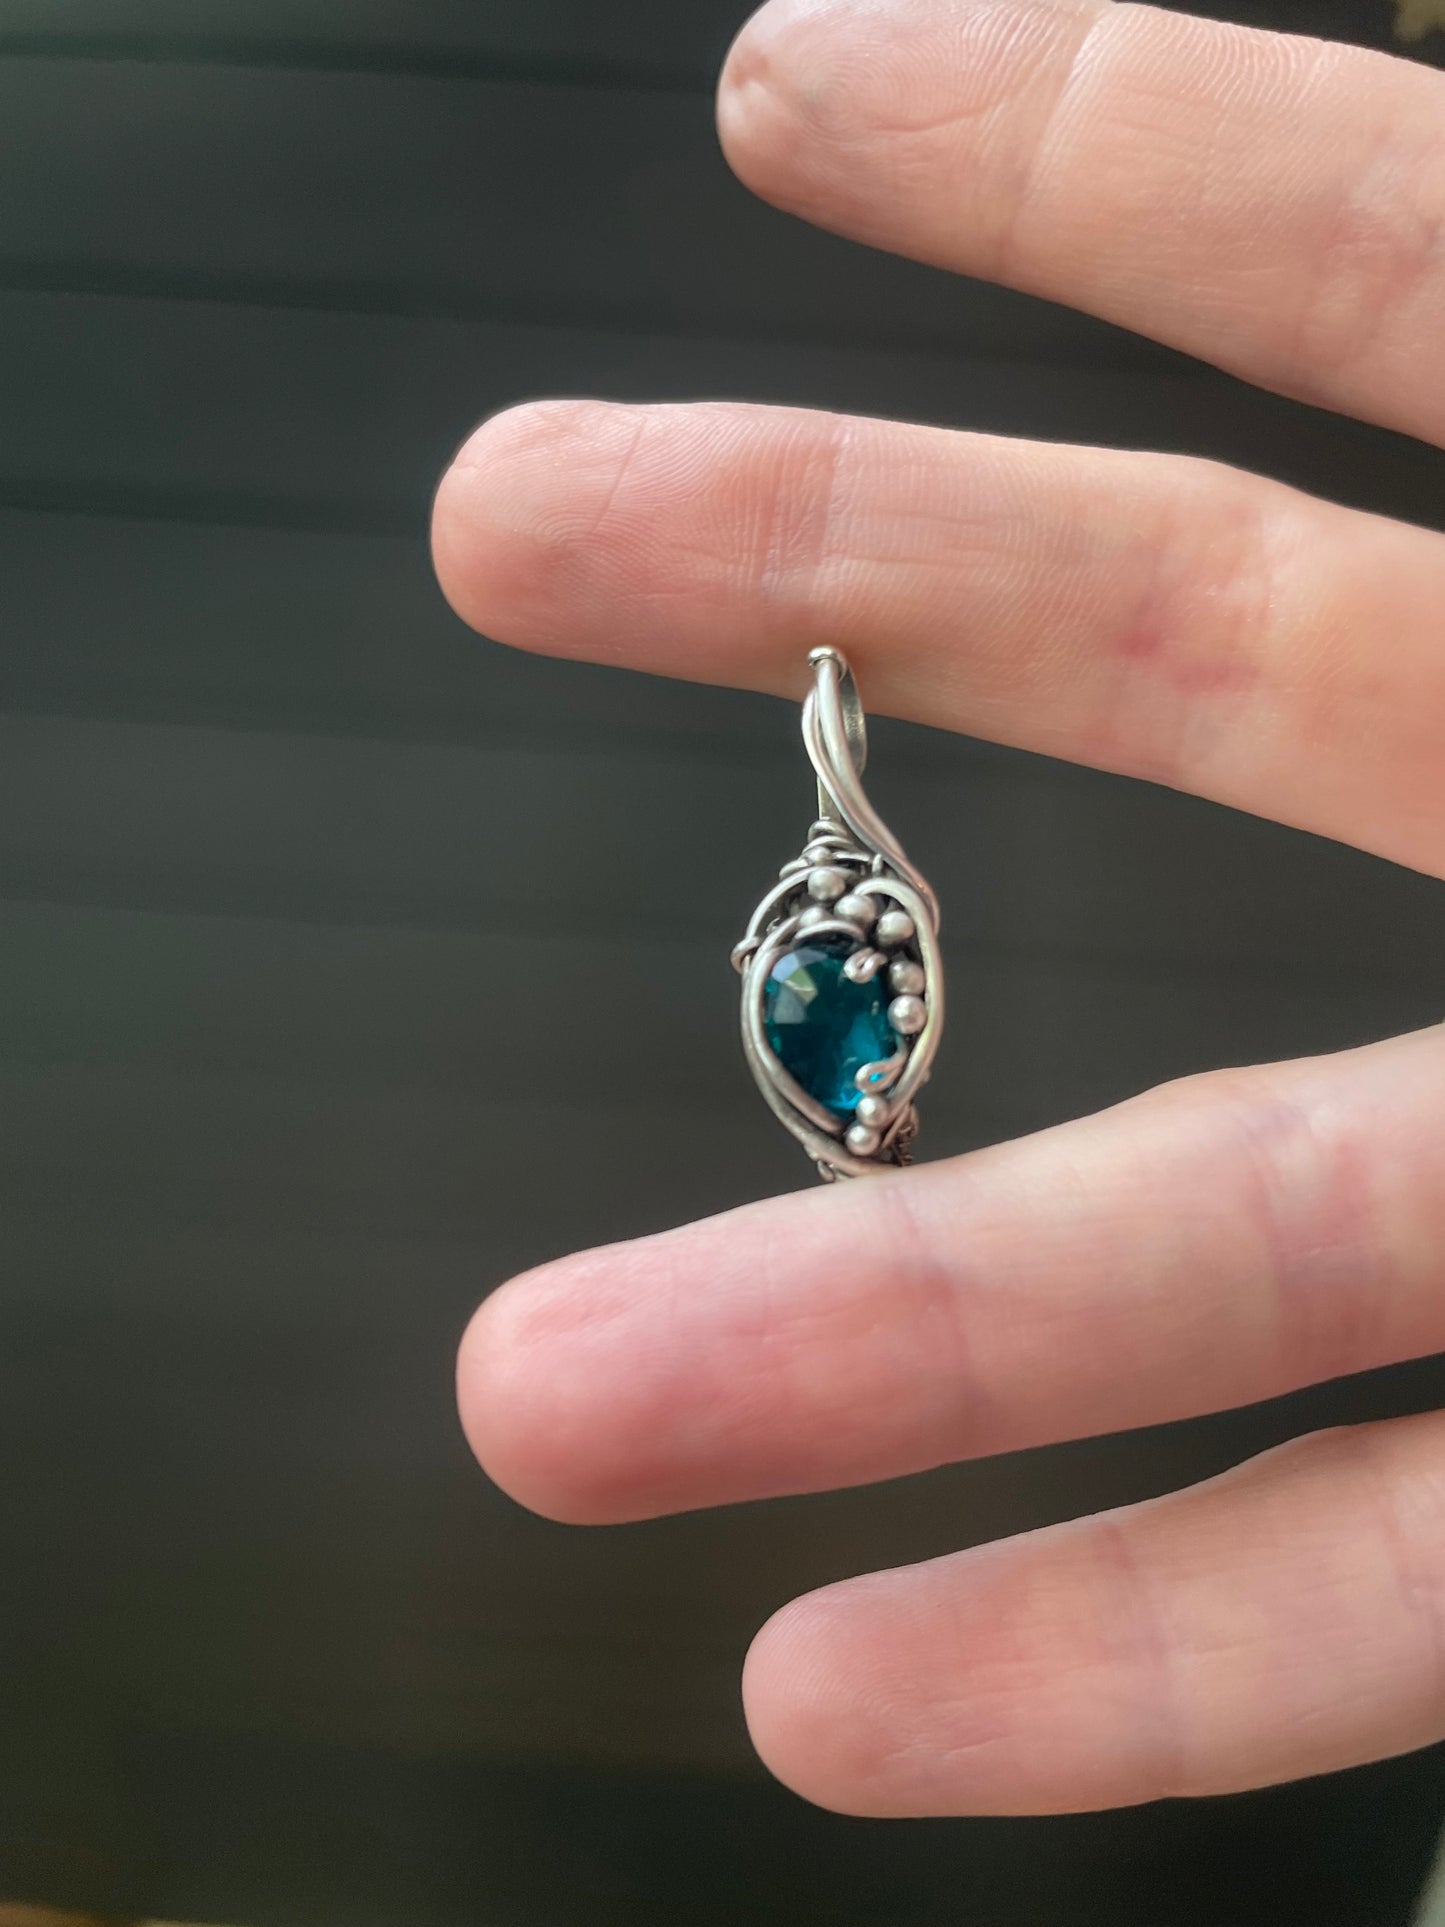 Teal wire wrap